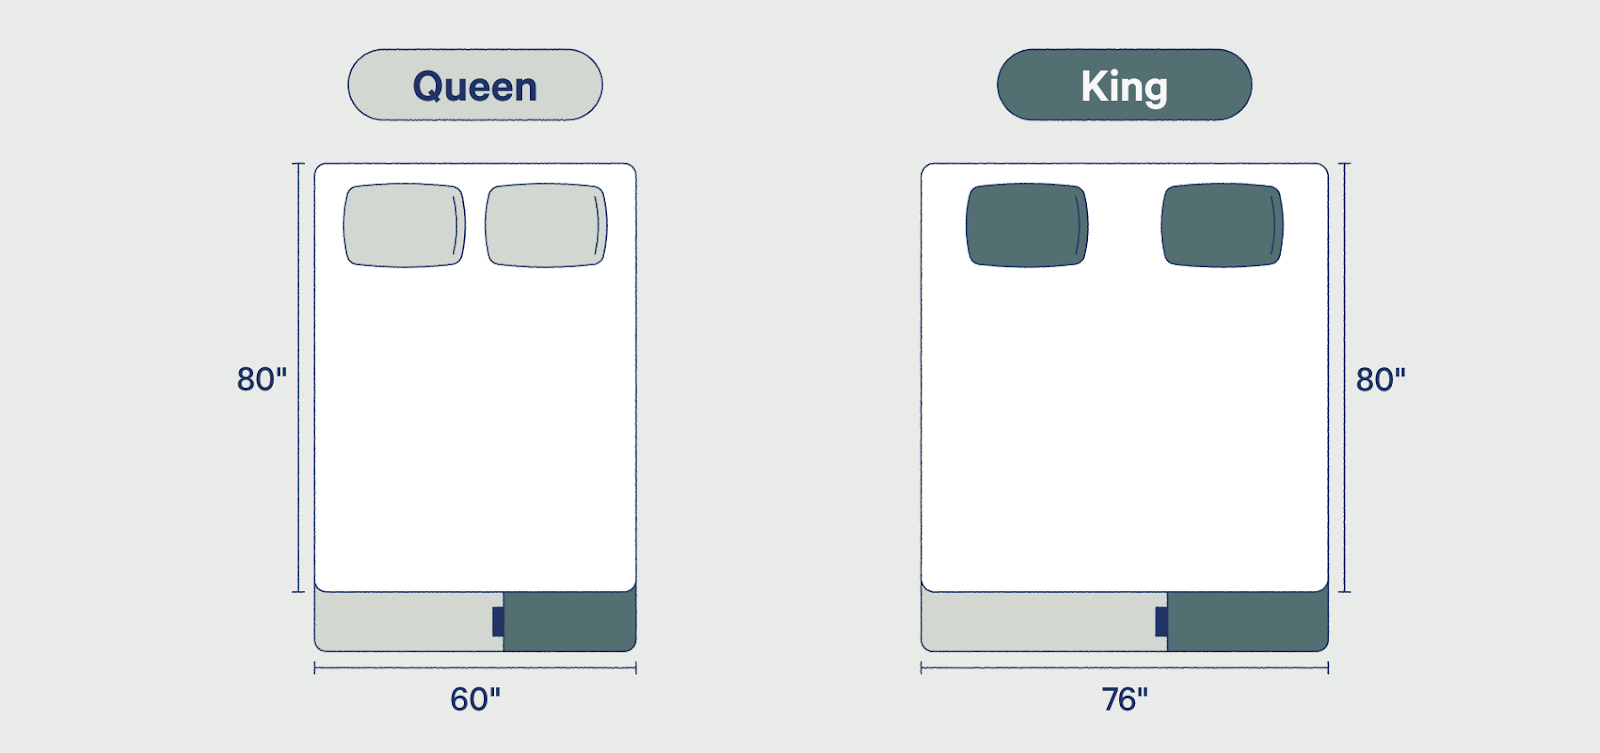 King Vs Queen Bed Size And Comparison, What Are The Dimensions For A King Size Bed